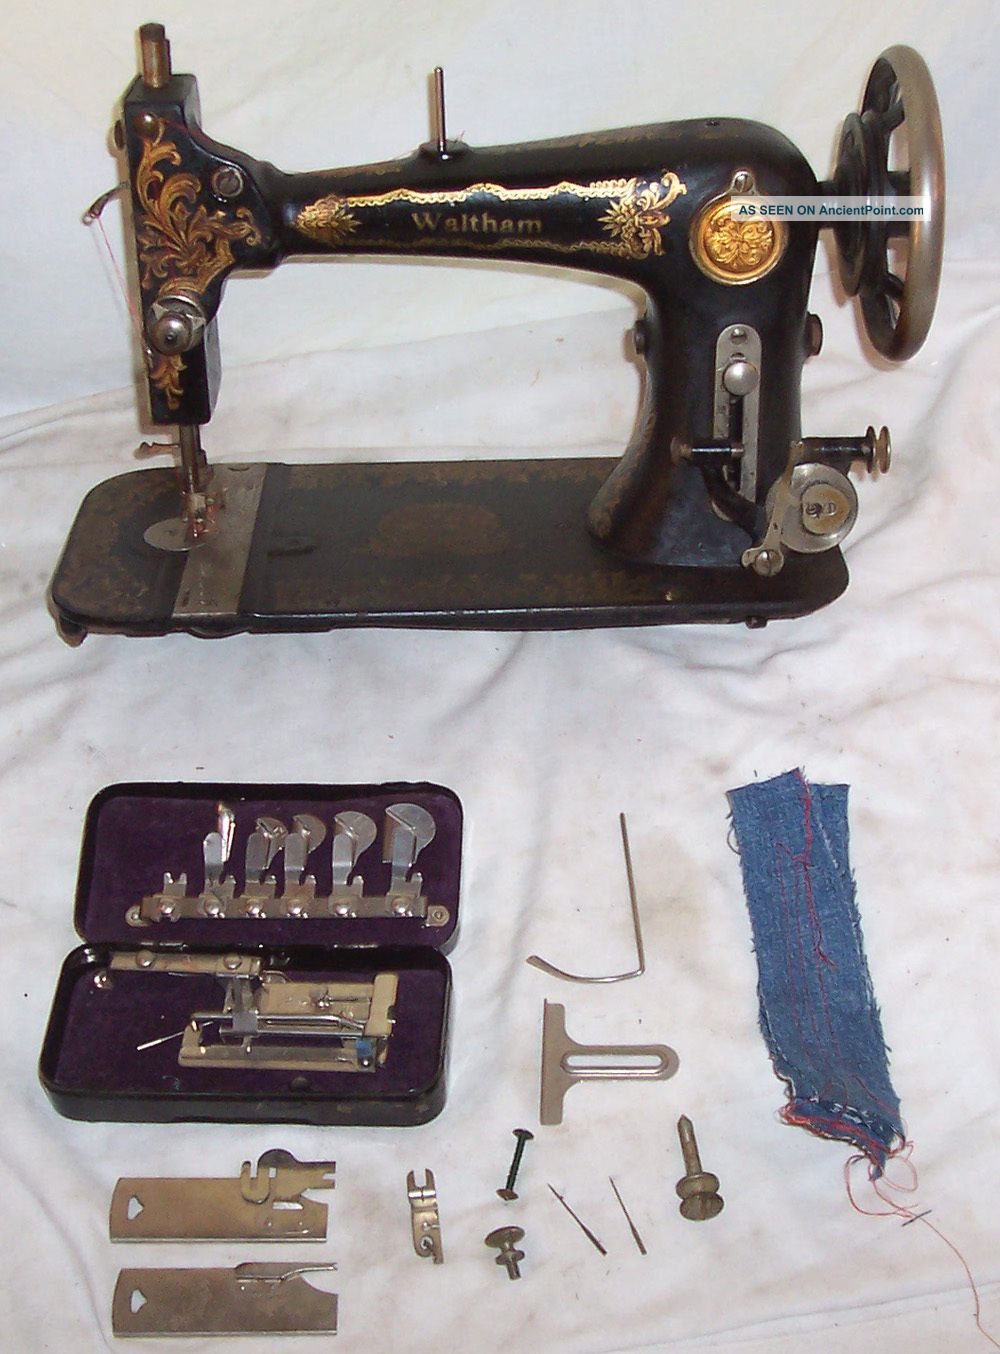 Rare Antique Waltham American Sphinx Treadle Sewing Machine - Serviced See Video Sewing Machines photo